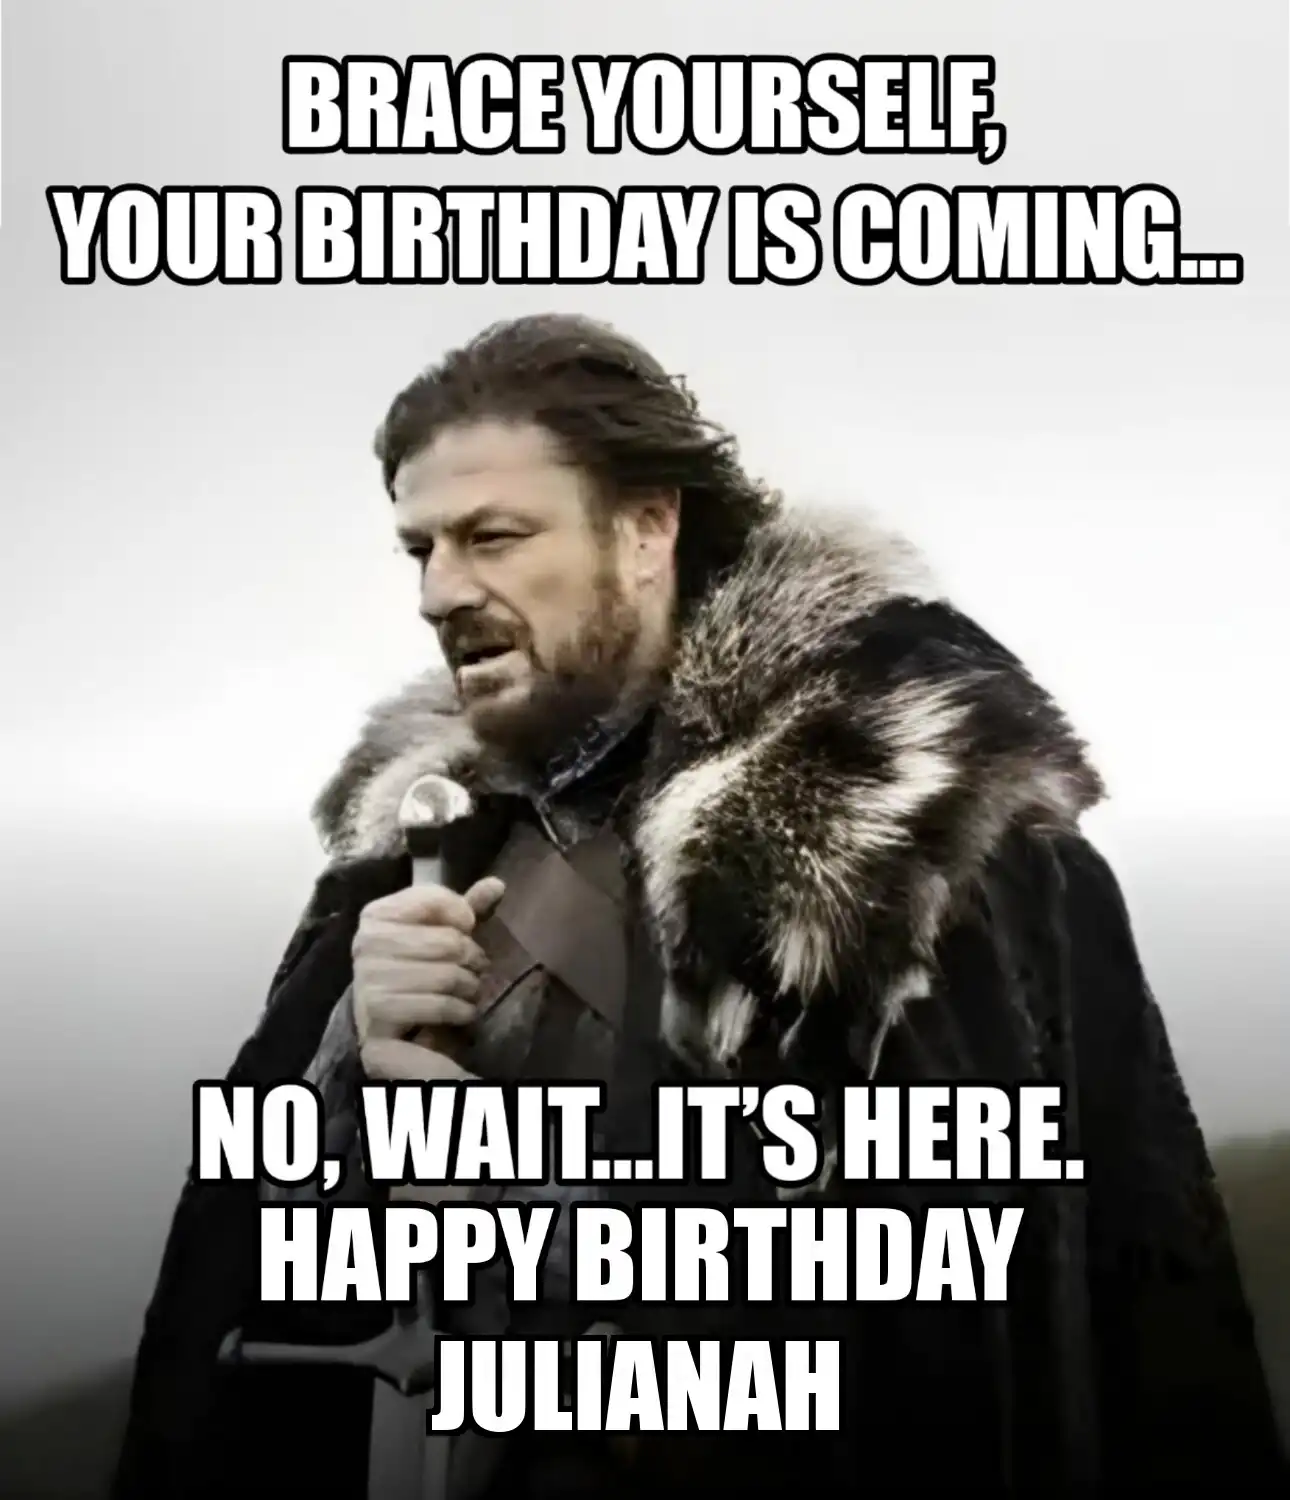 Happy Birthday Julianah Brace Yourself Your Birthday Is Coming Meme